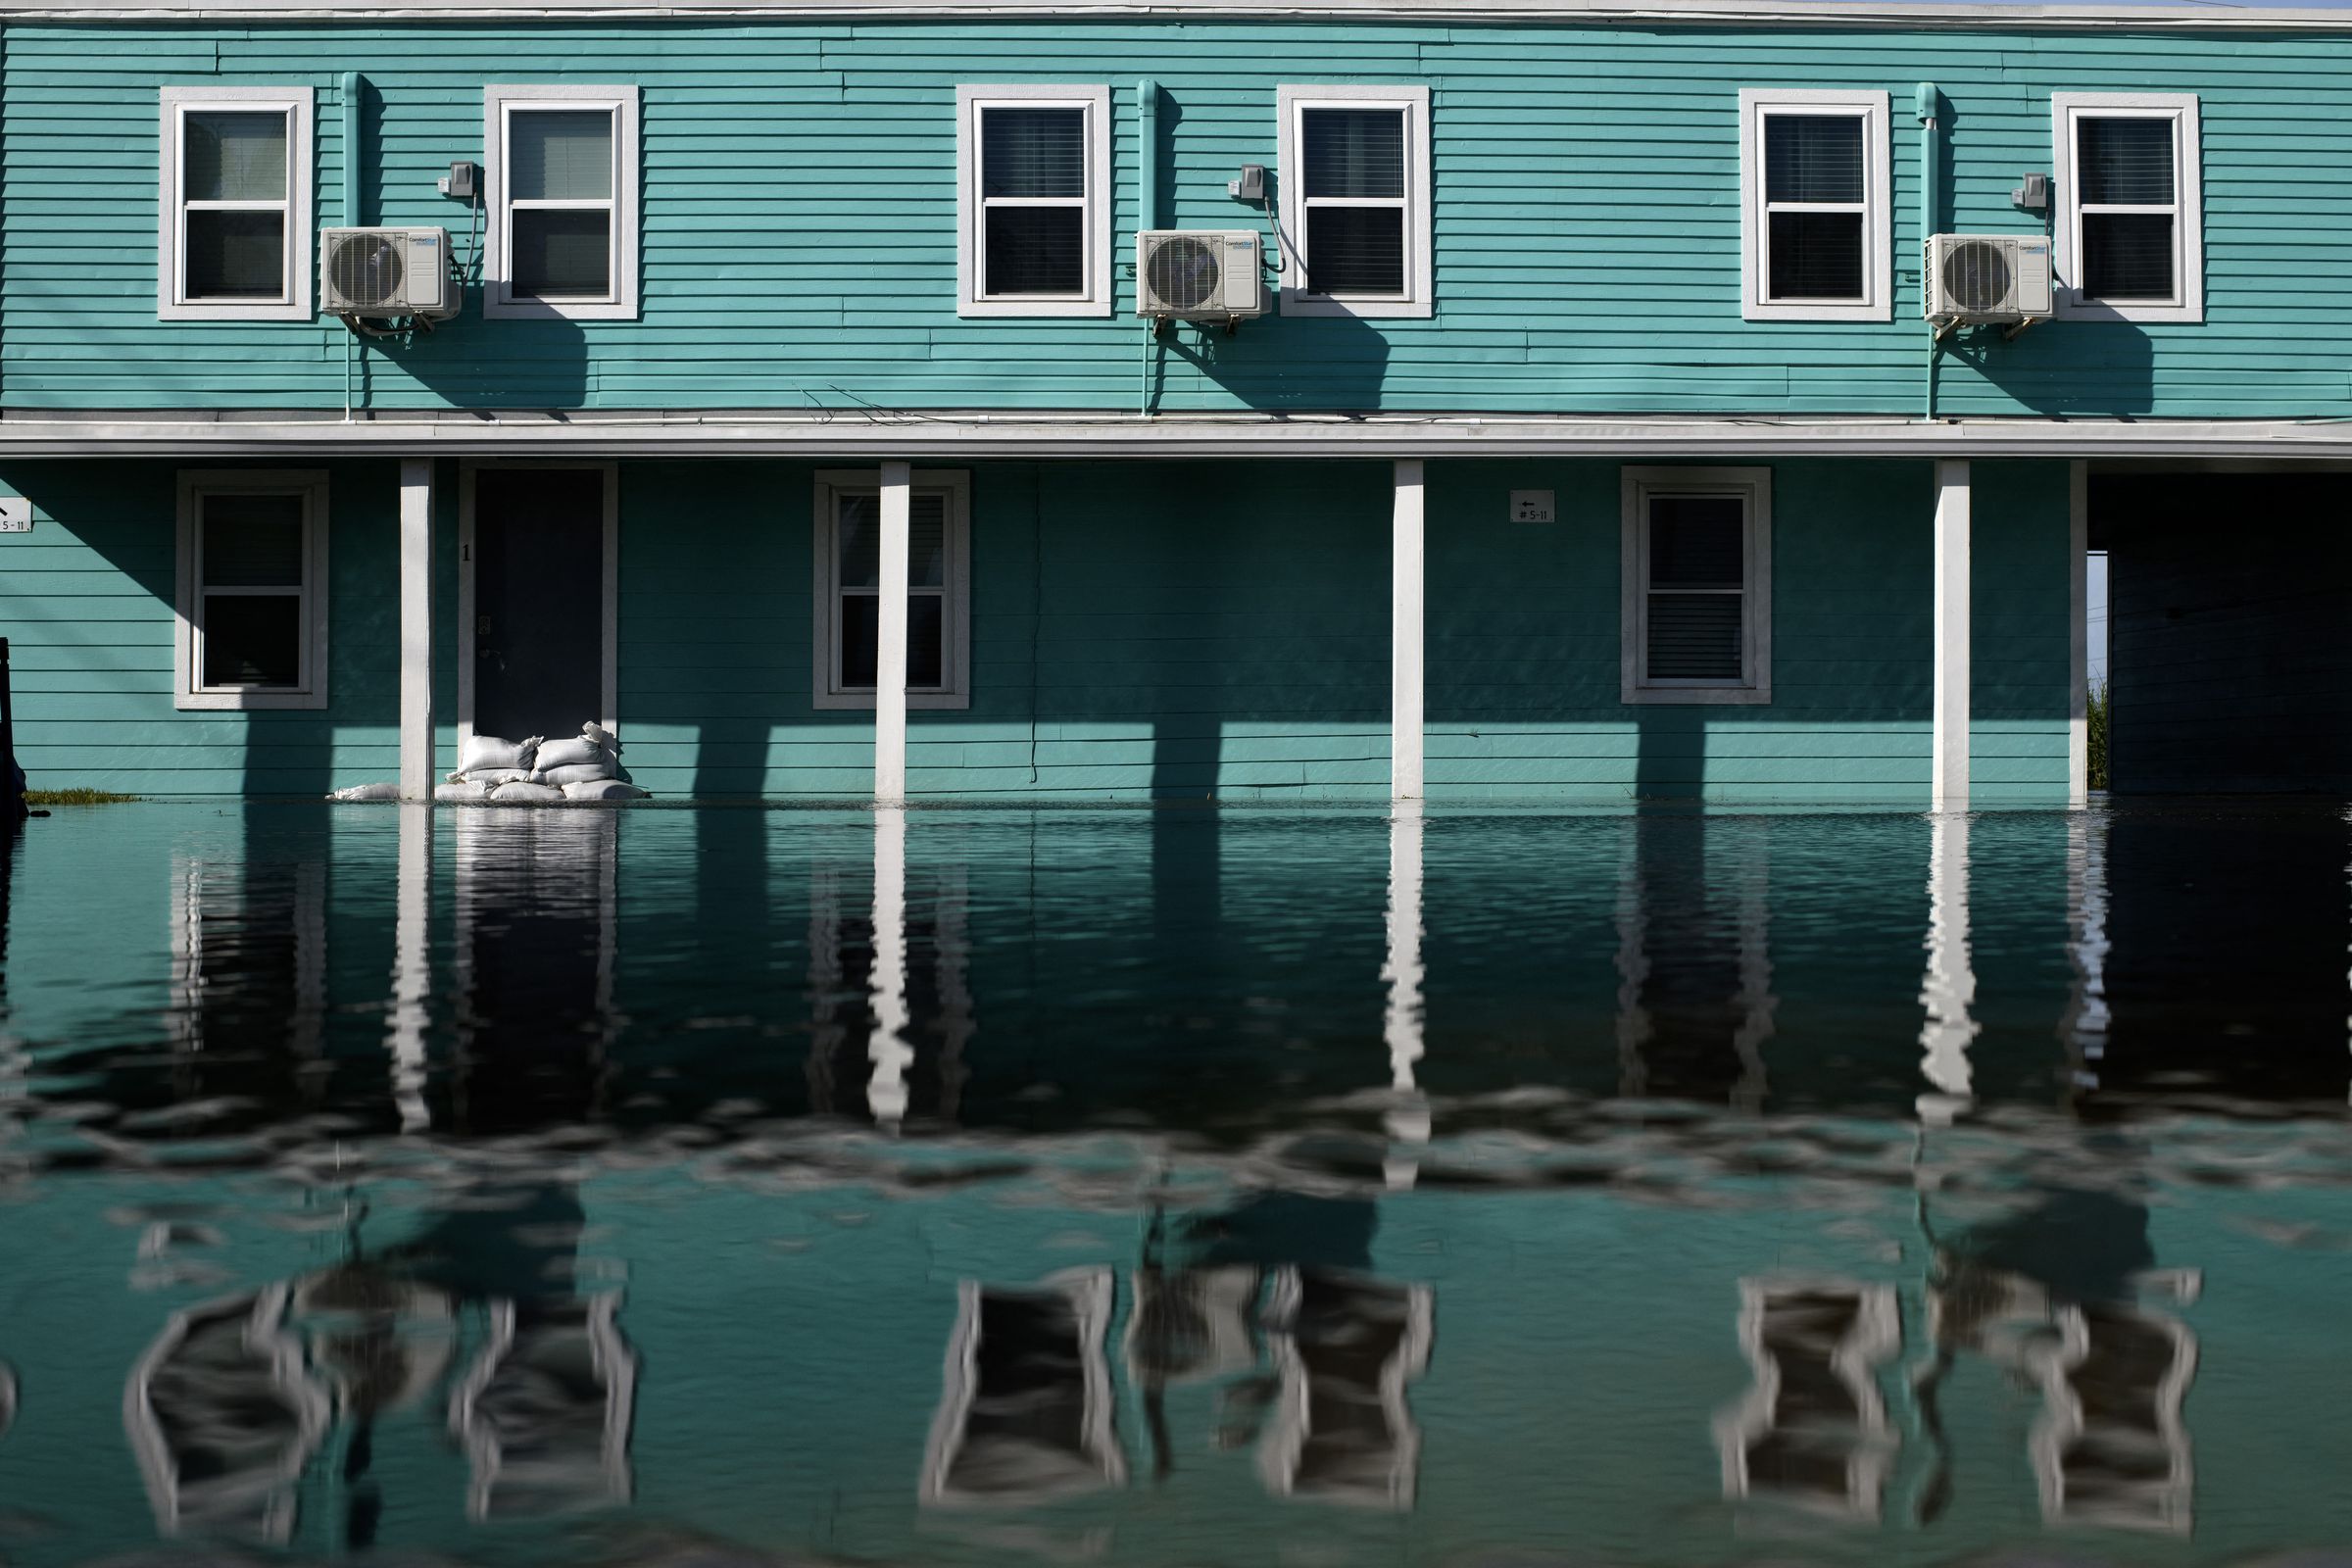 Air conditioning units amid a row of windows in a motel rising above floodwaters.